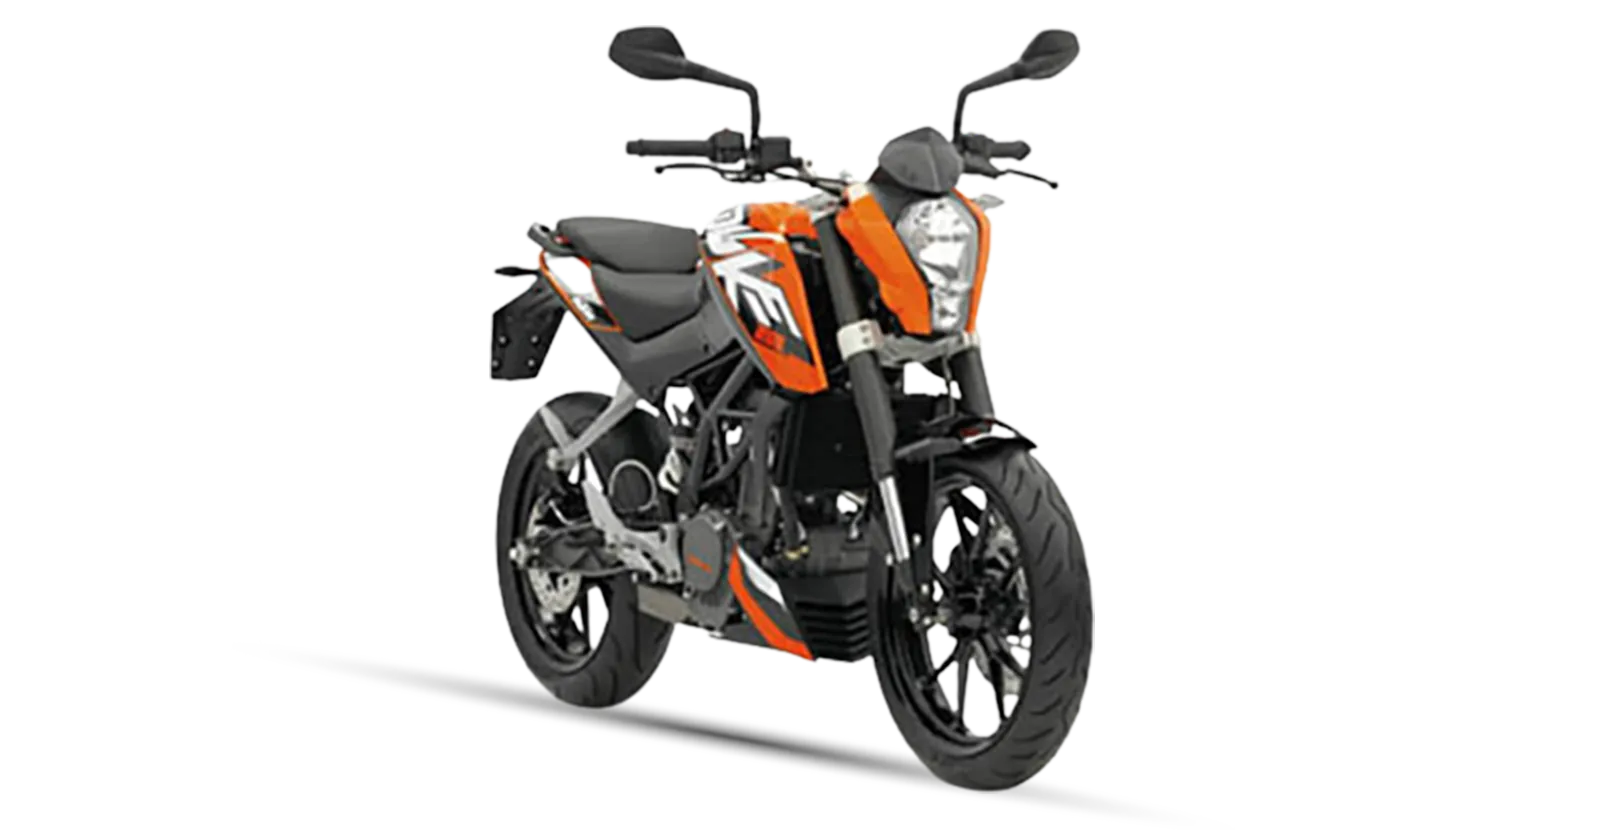 KTM Duke 200 - Latest Price, Mileage, Images, Colors, Specifications